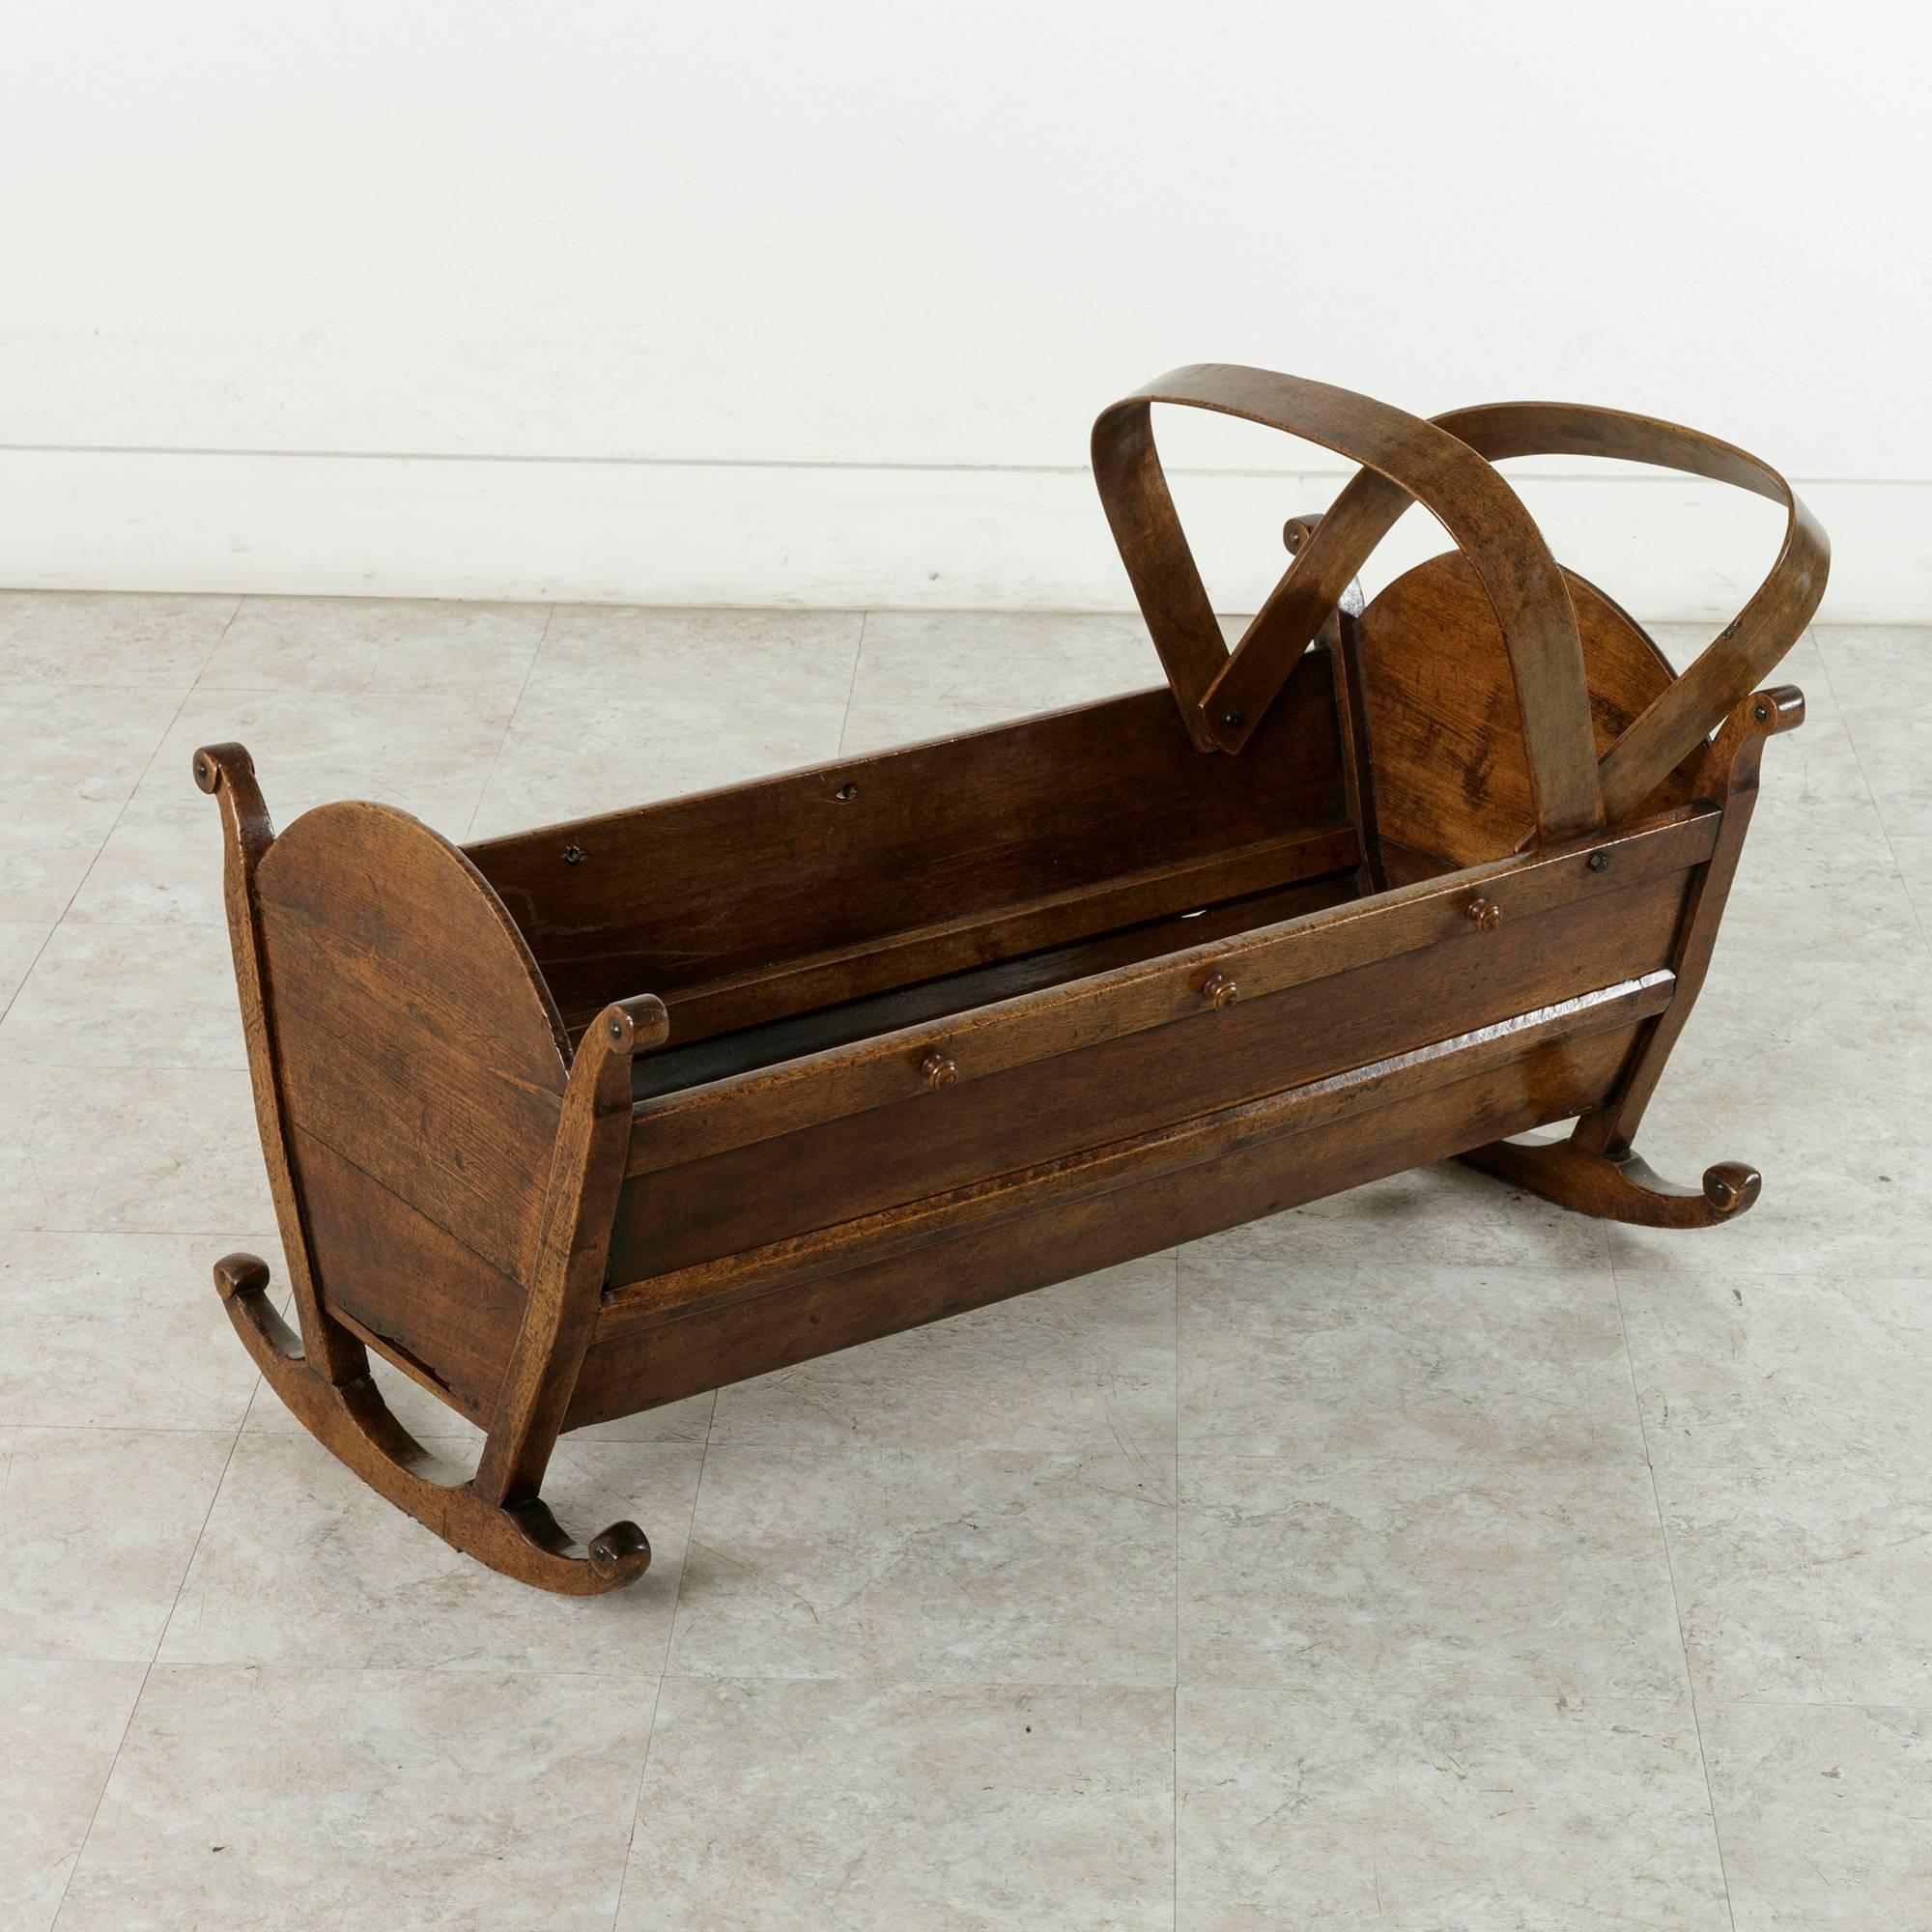 Originally from the region of Savoie, France, near the Swiss border, this mid-nineteenth century hand-carved walnut cradle rests on two scrolled rockers. Wooden knobs on each side of the cradle were originally used to attach leather straps that